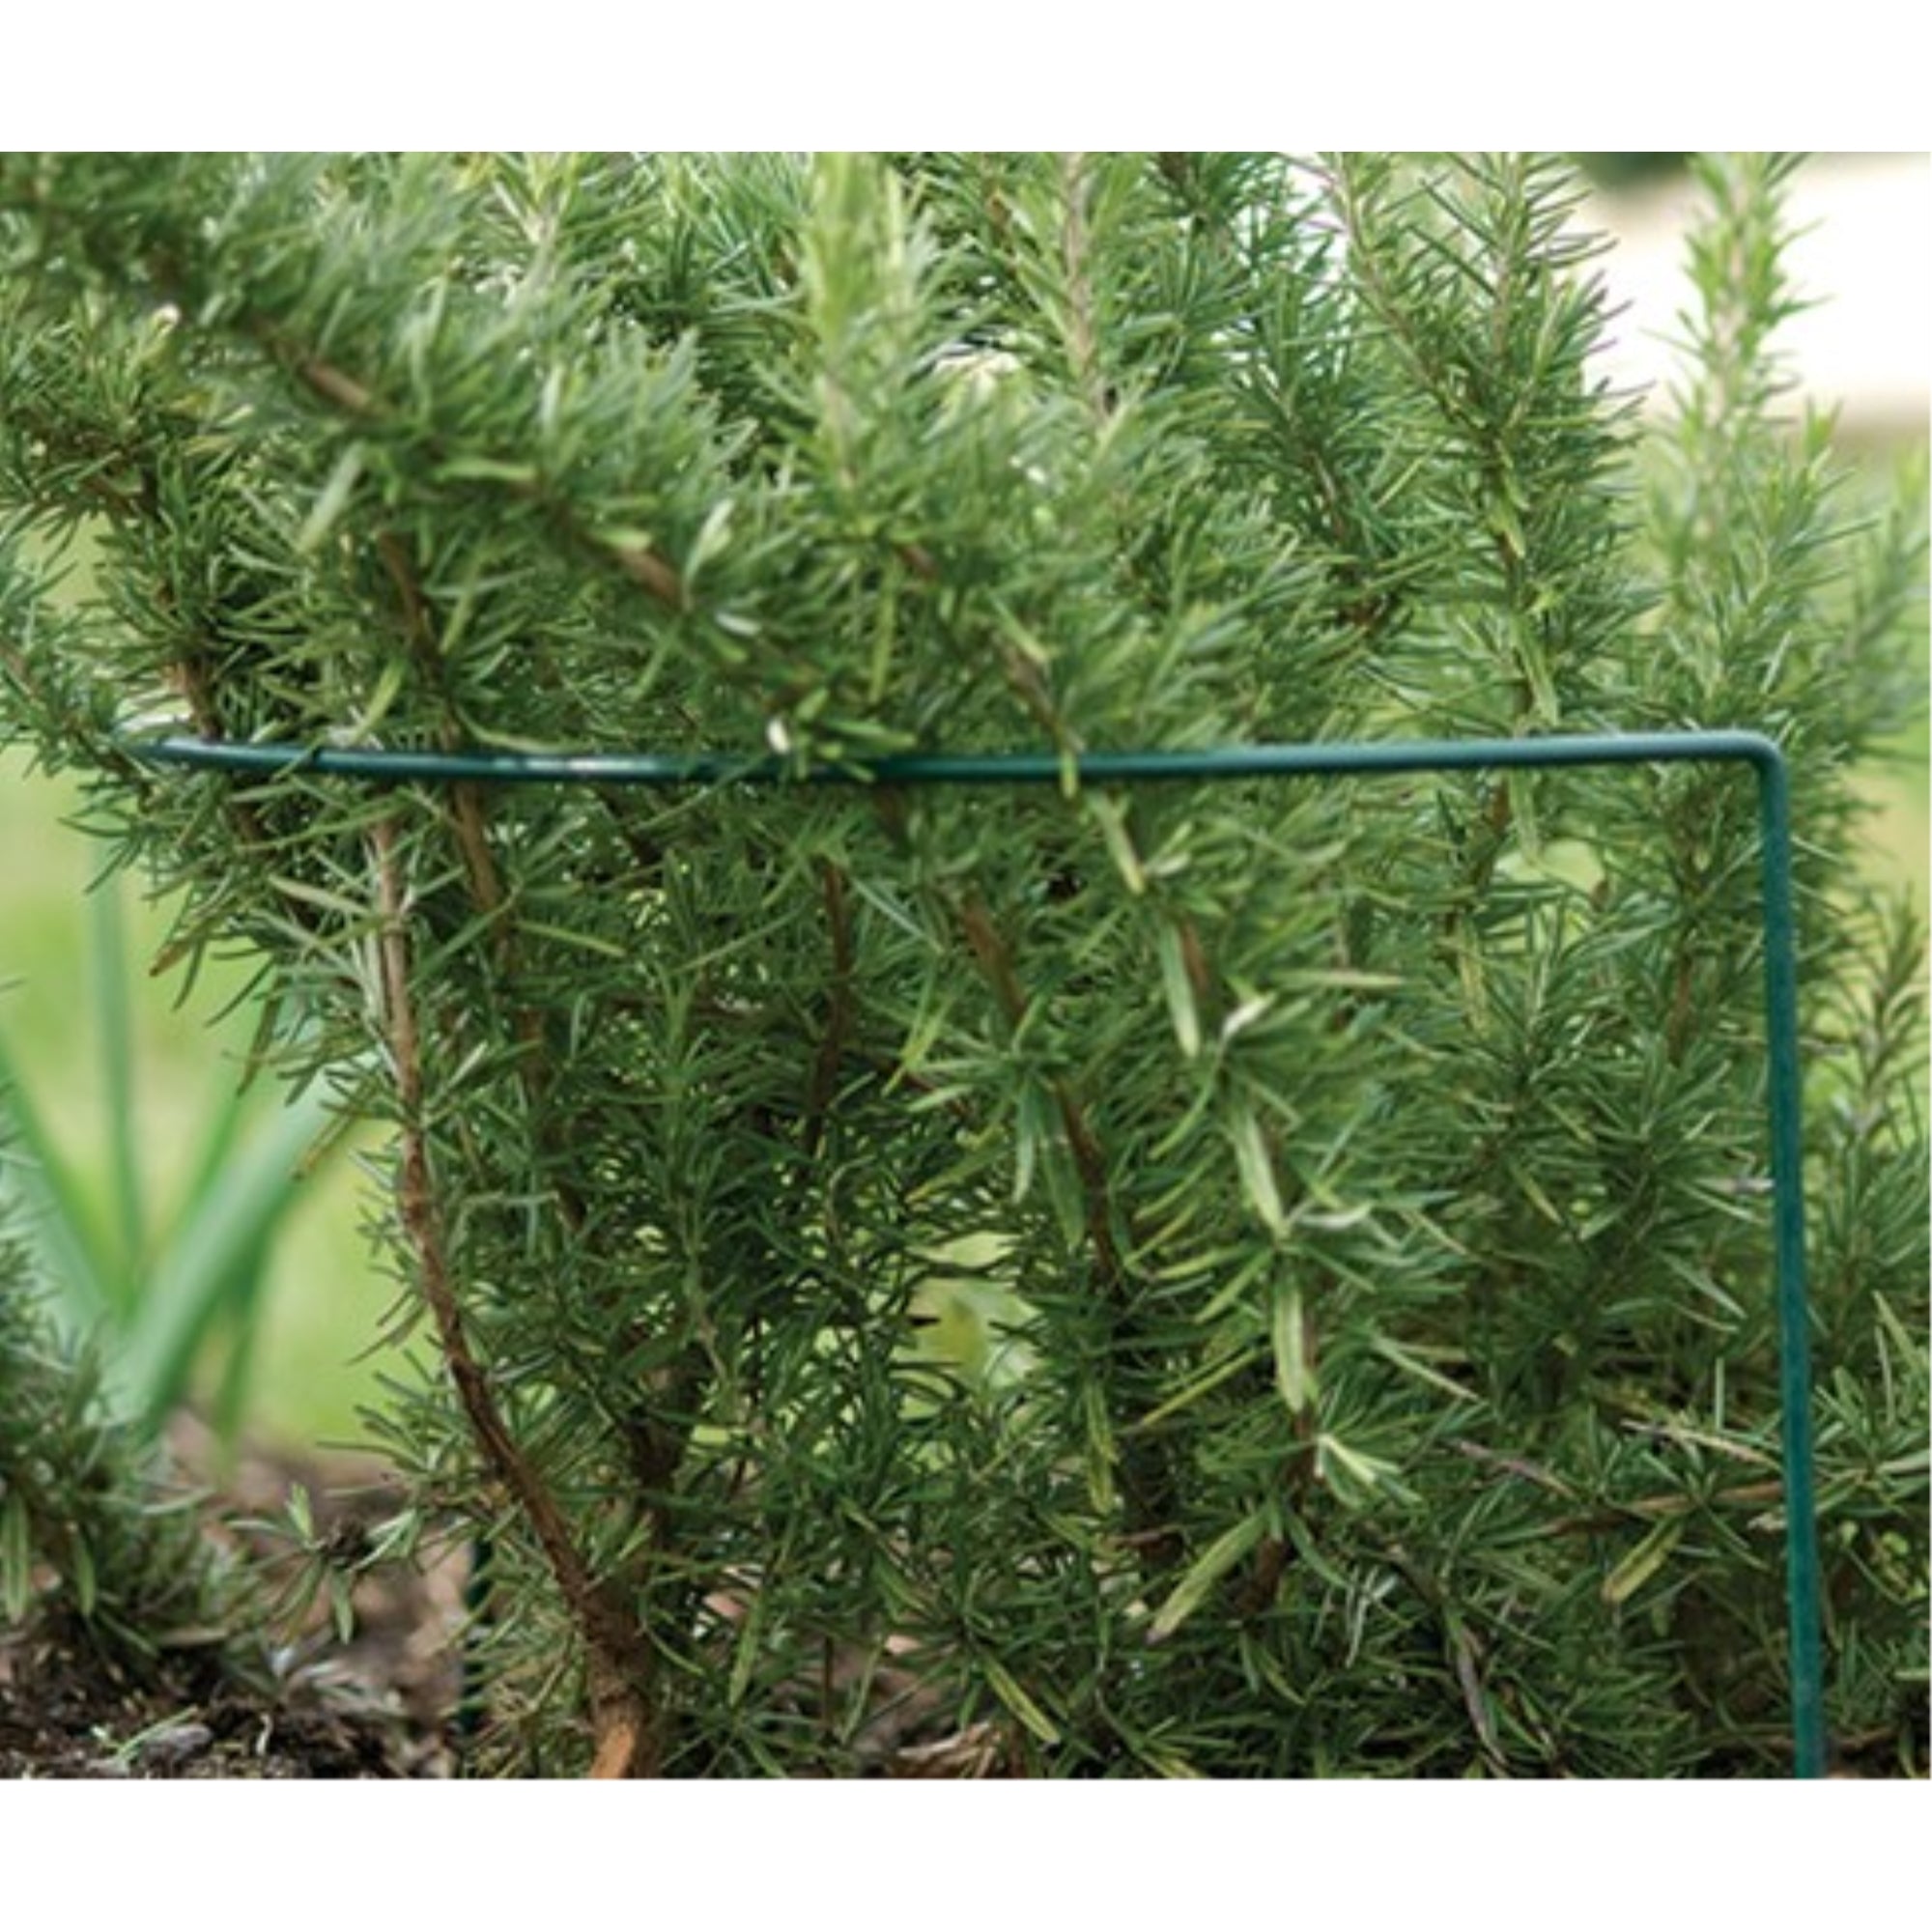 Luster Leaf Plant Prop Support For Gardens and Flower Beds, Green 10 x 30 in.